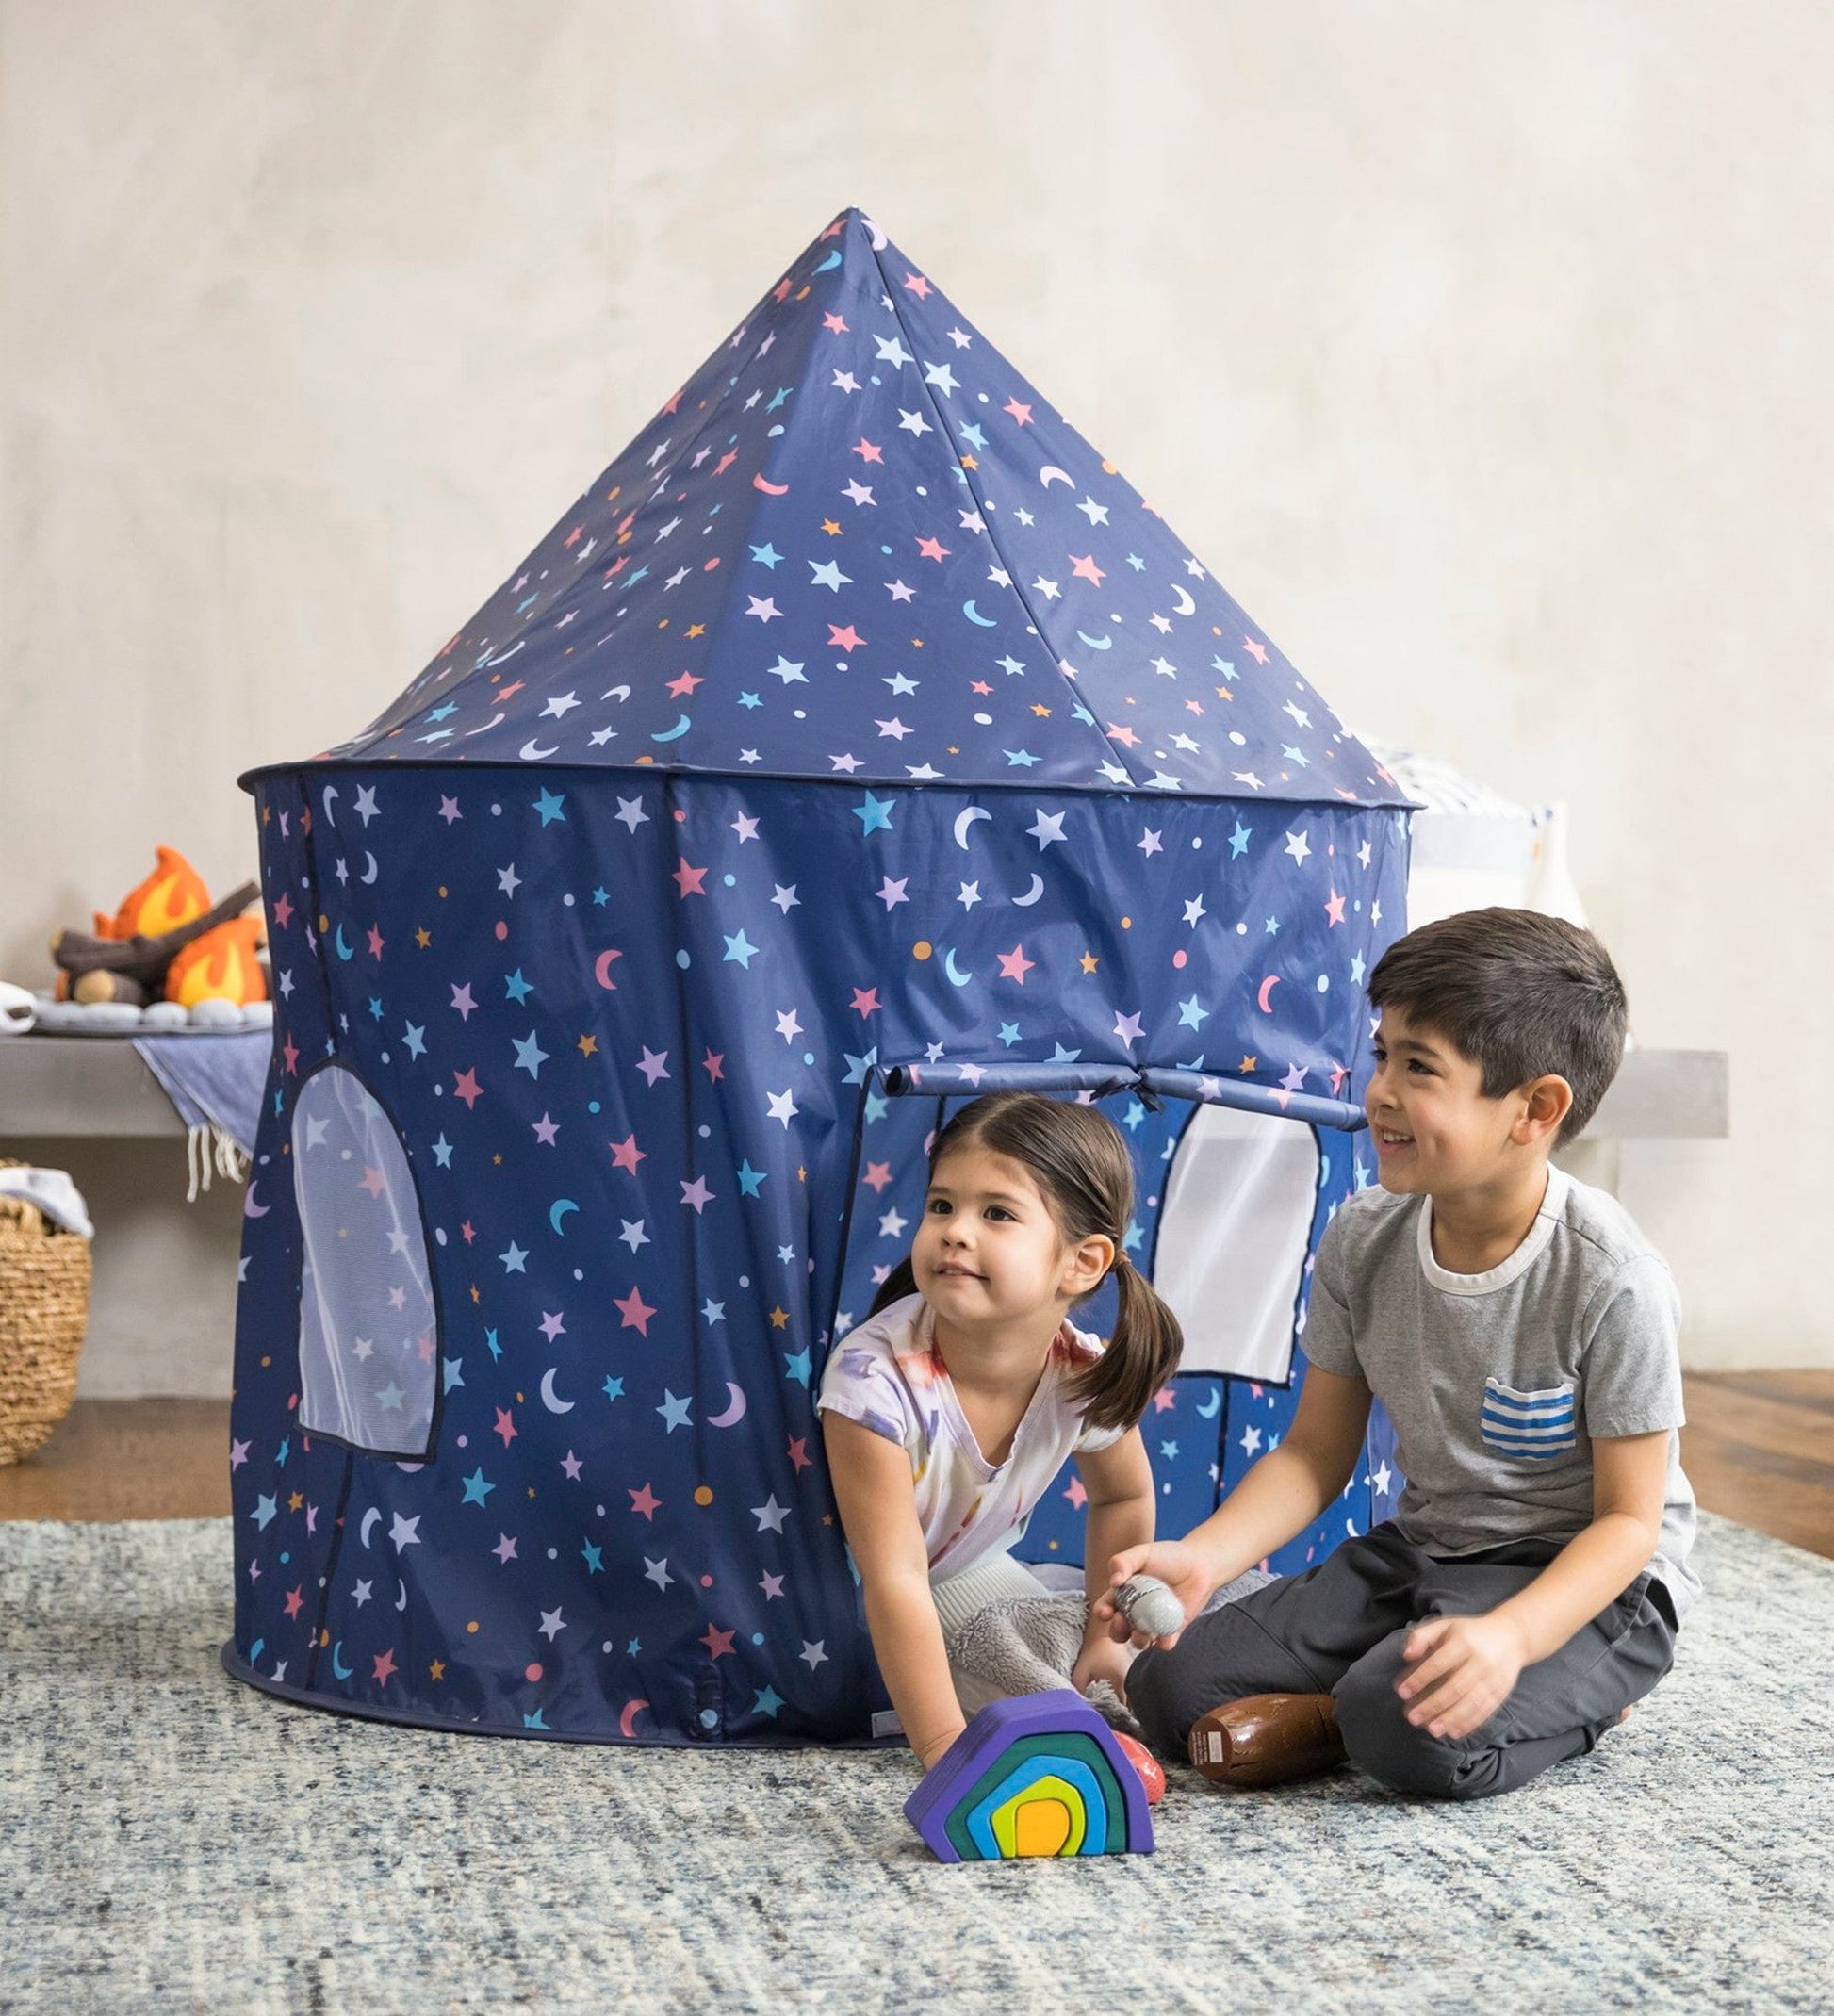 53-Inch Celestial Pop-Up Play Tent with Lights